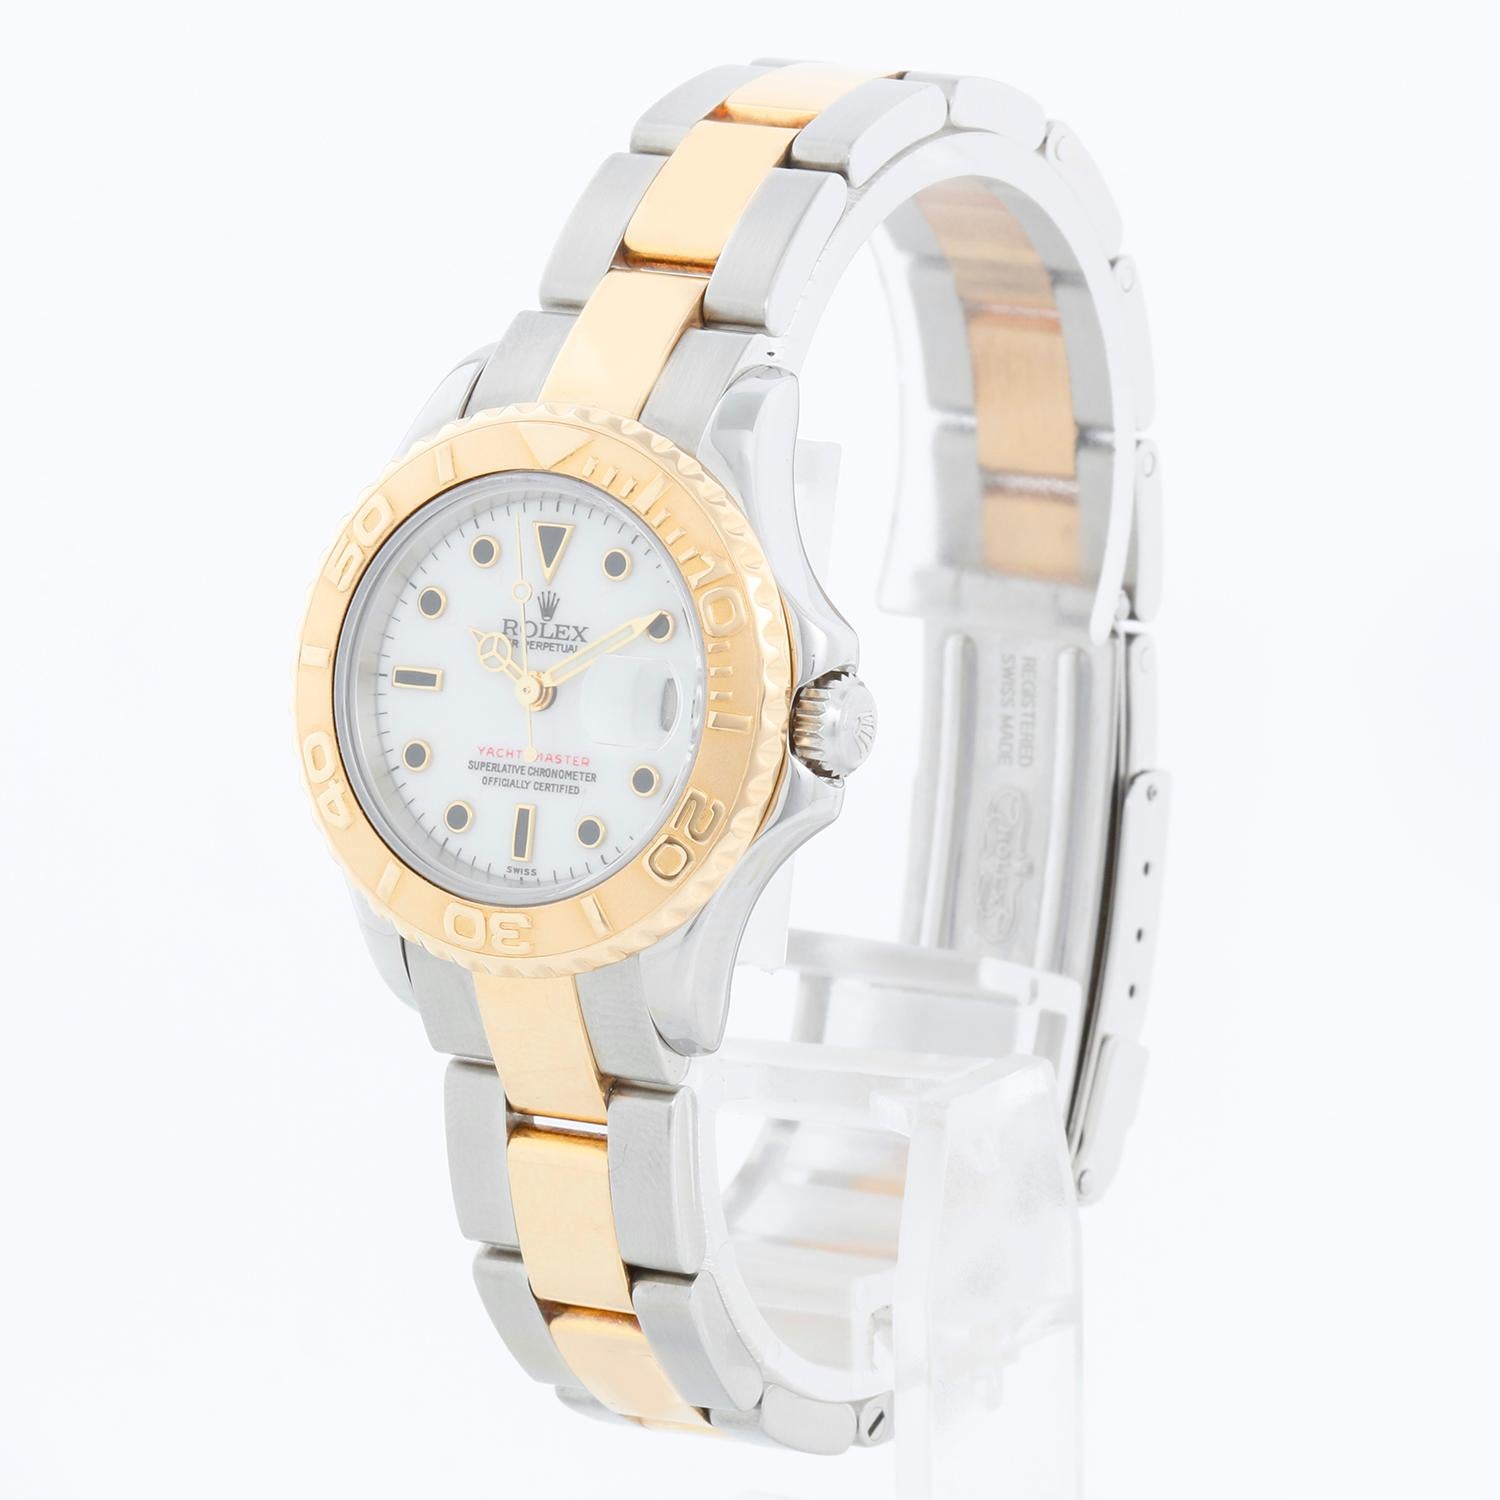 Rolex Ladies Yacht-Master 2-Tone Watch 69623 White Dial - Automatic winding; sapphire crystal. Stainless steel case with 18k yellow gold bezel . White dial with black hour markers. Stainless steel and 18k yellow gold Oyster bracelet with flip-lock